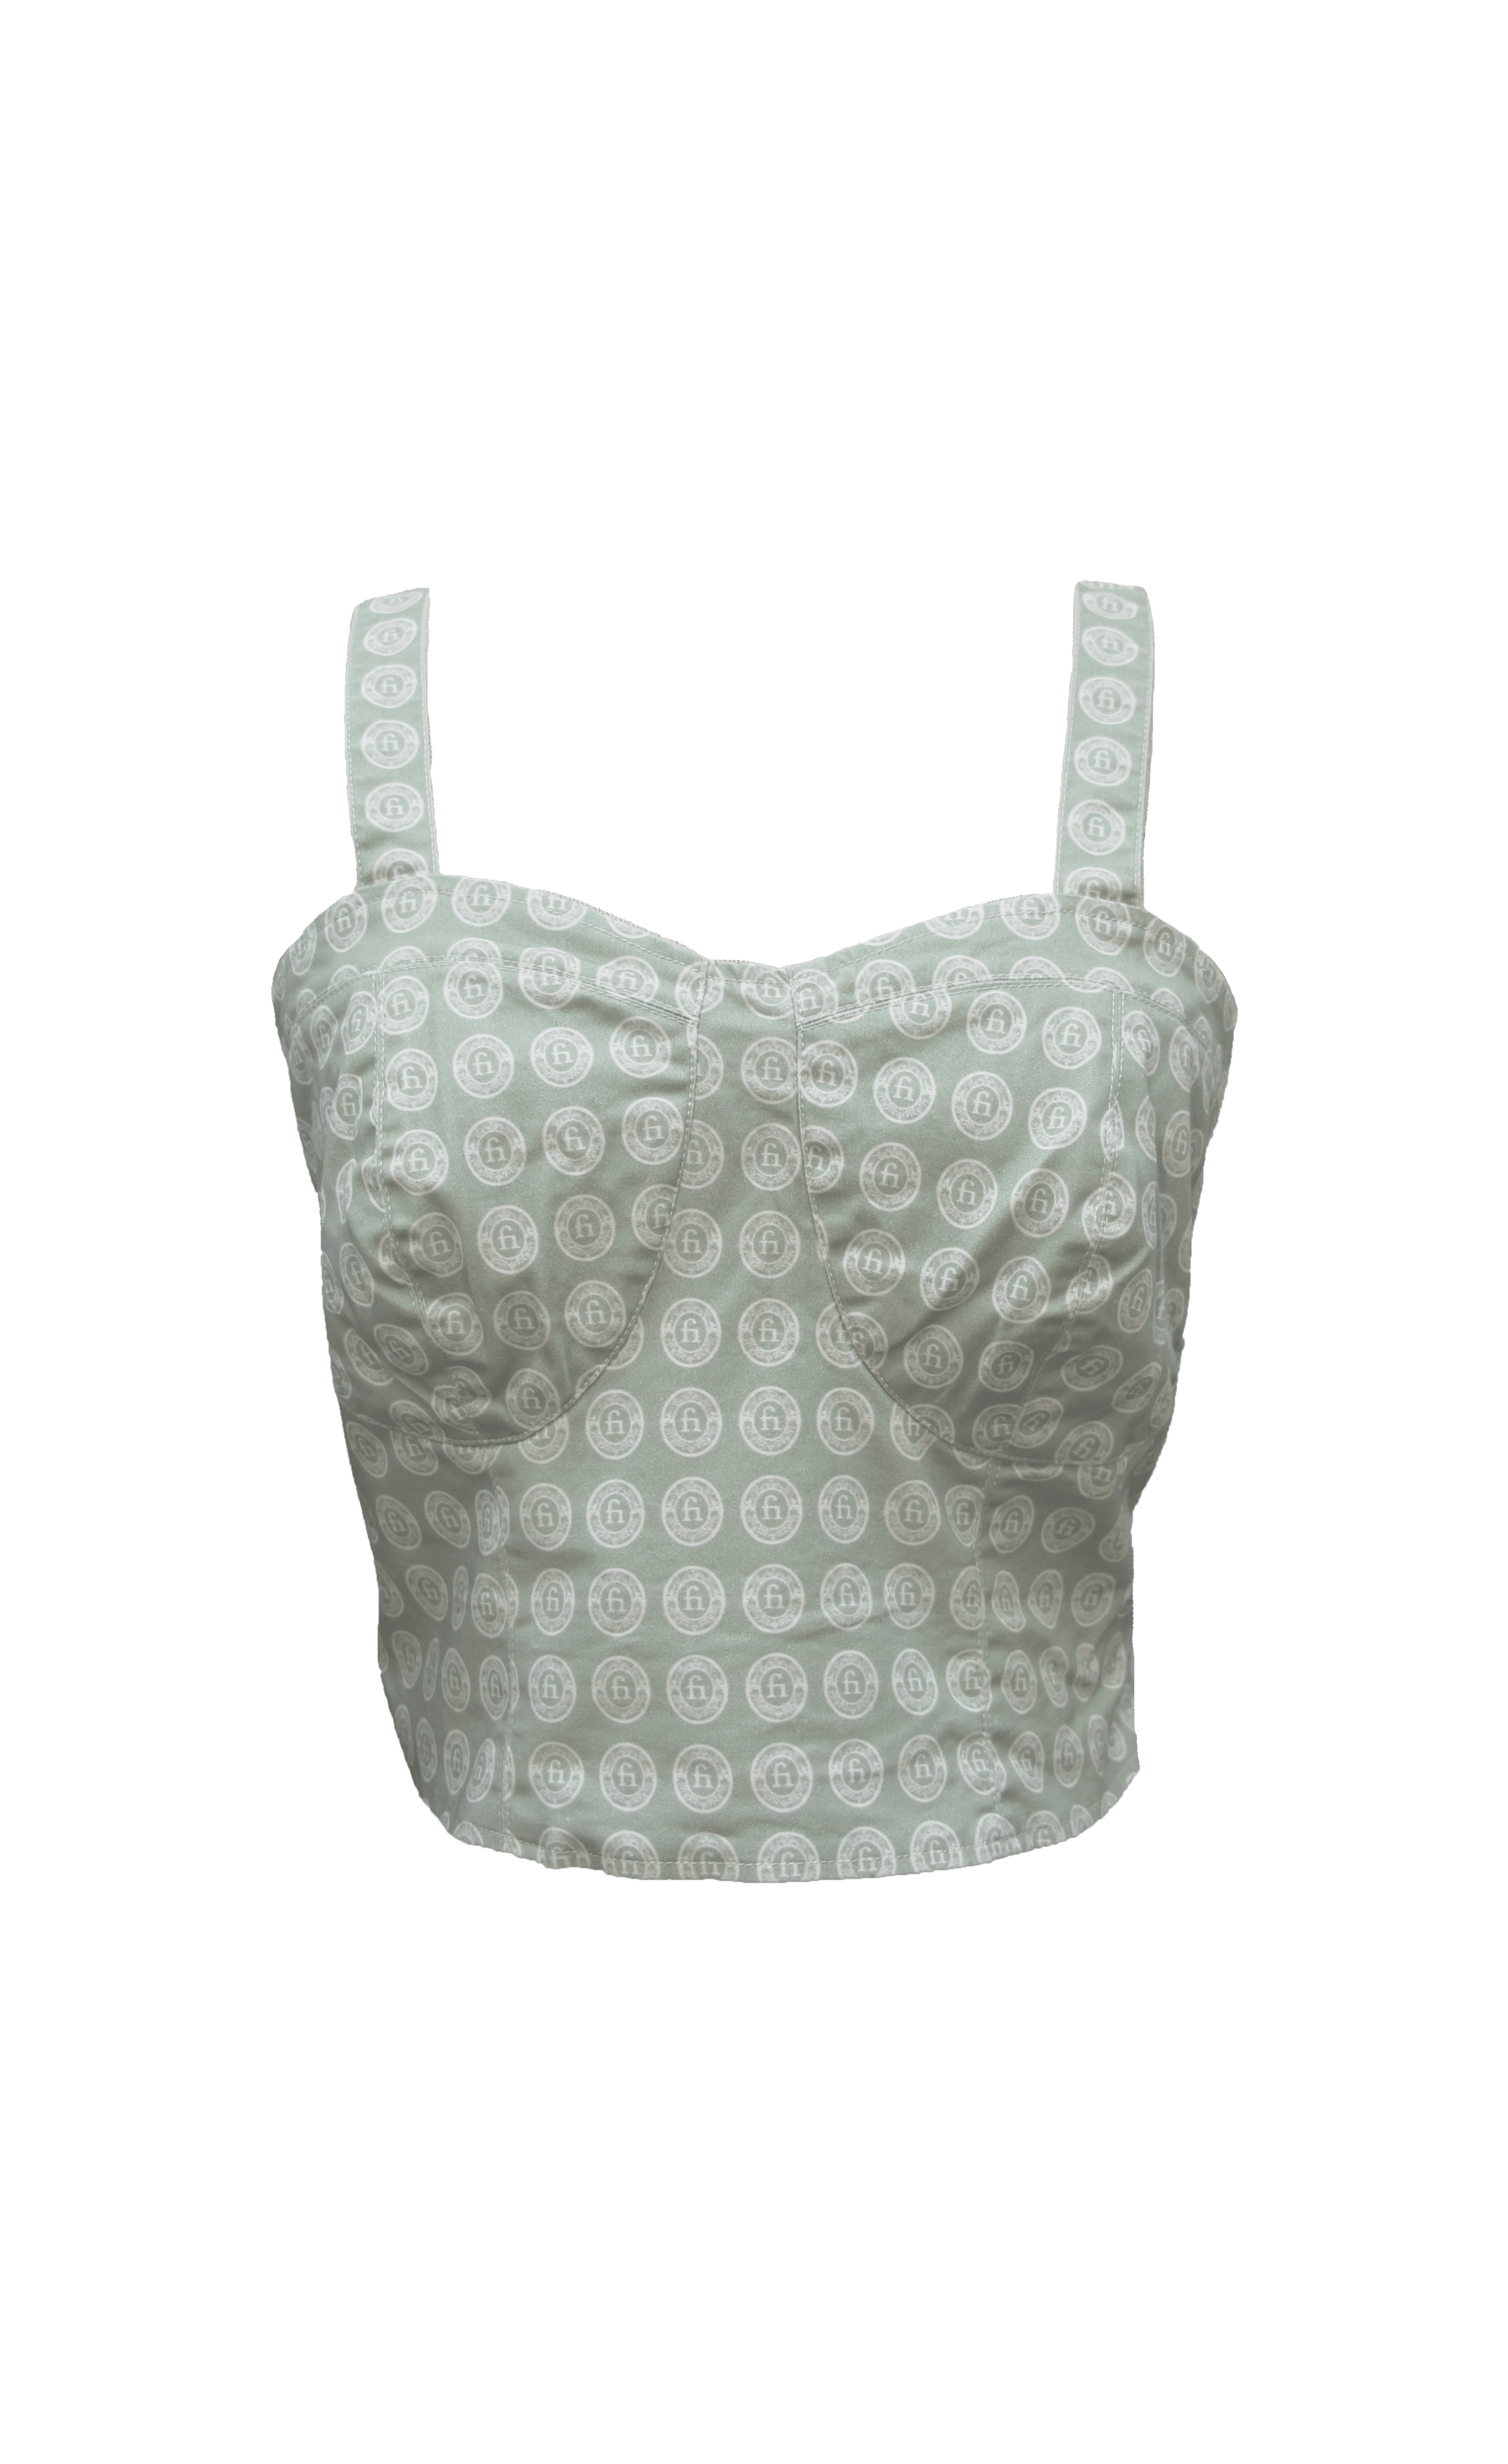 ORSU - Sweetheart Neckline Crop Top with Wide Straps in Celadon Green Fabric with White Coat of Arms Print Cotton Brassière Fête Impériale